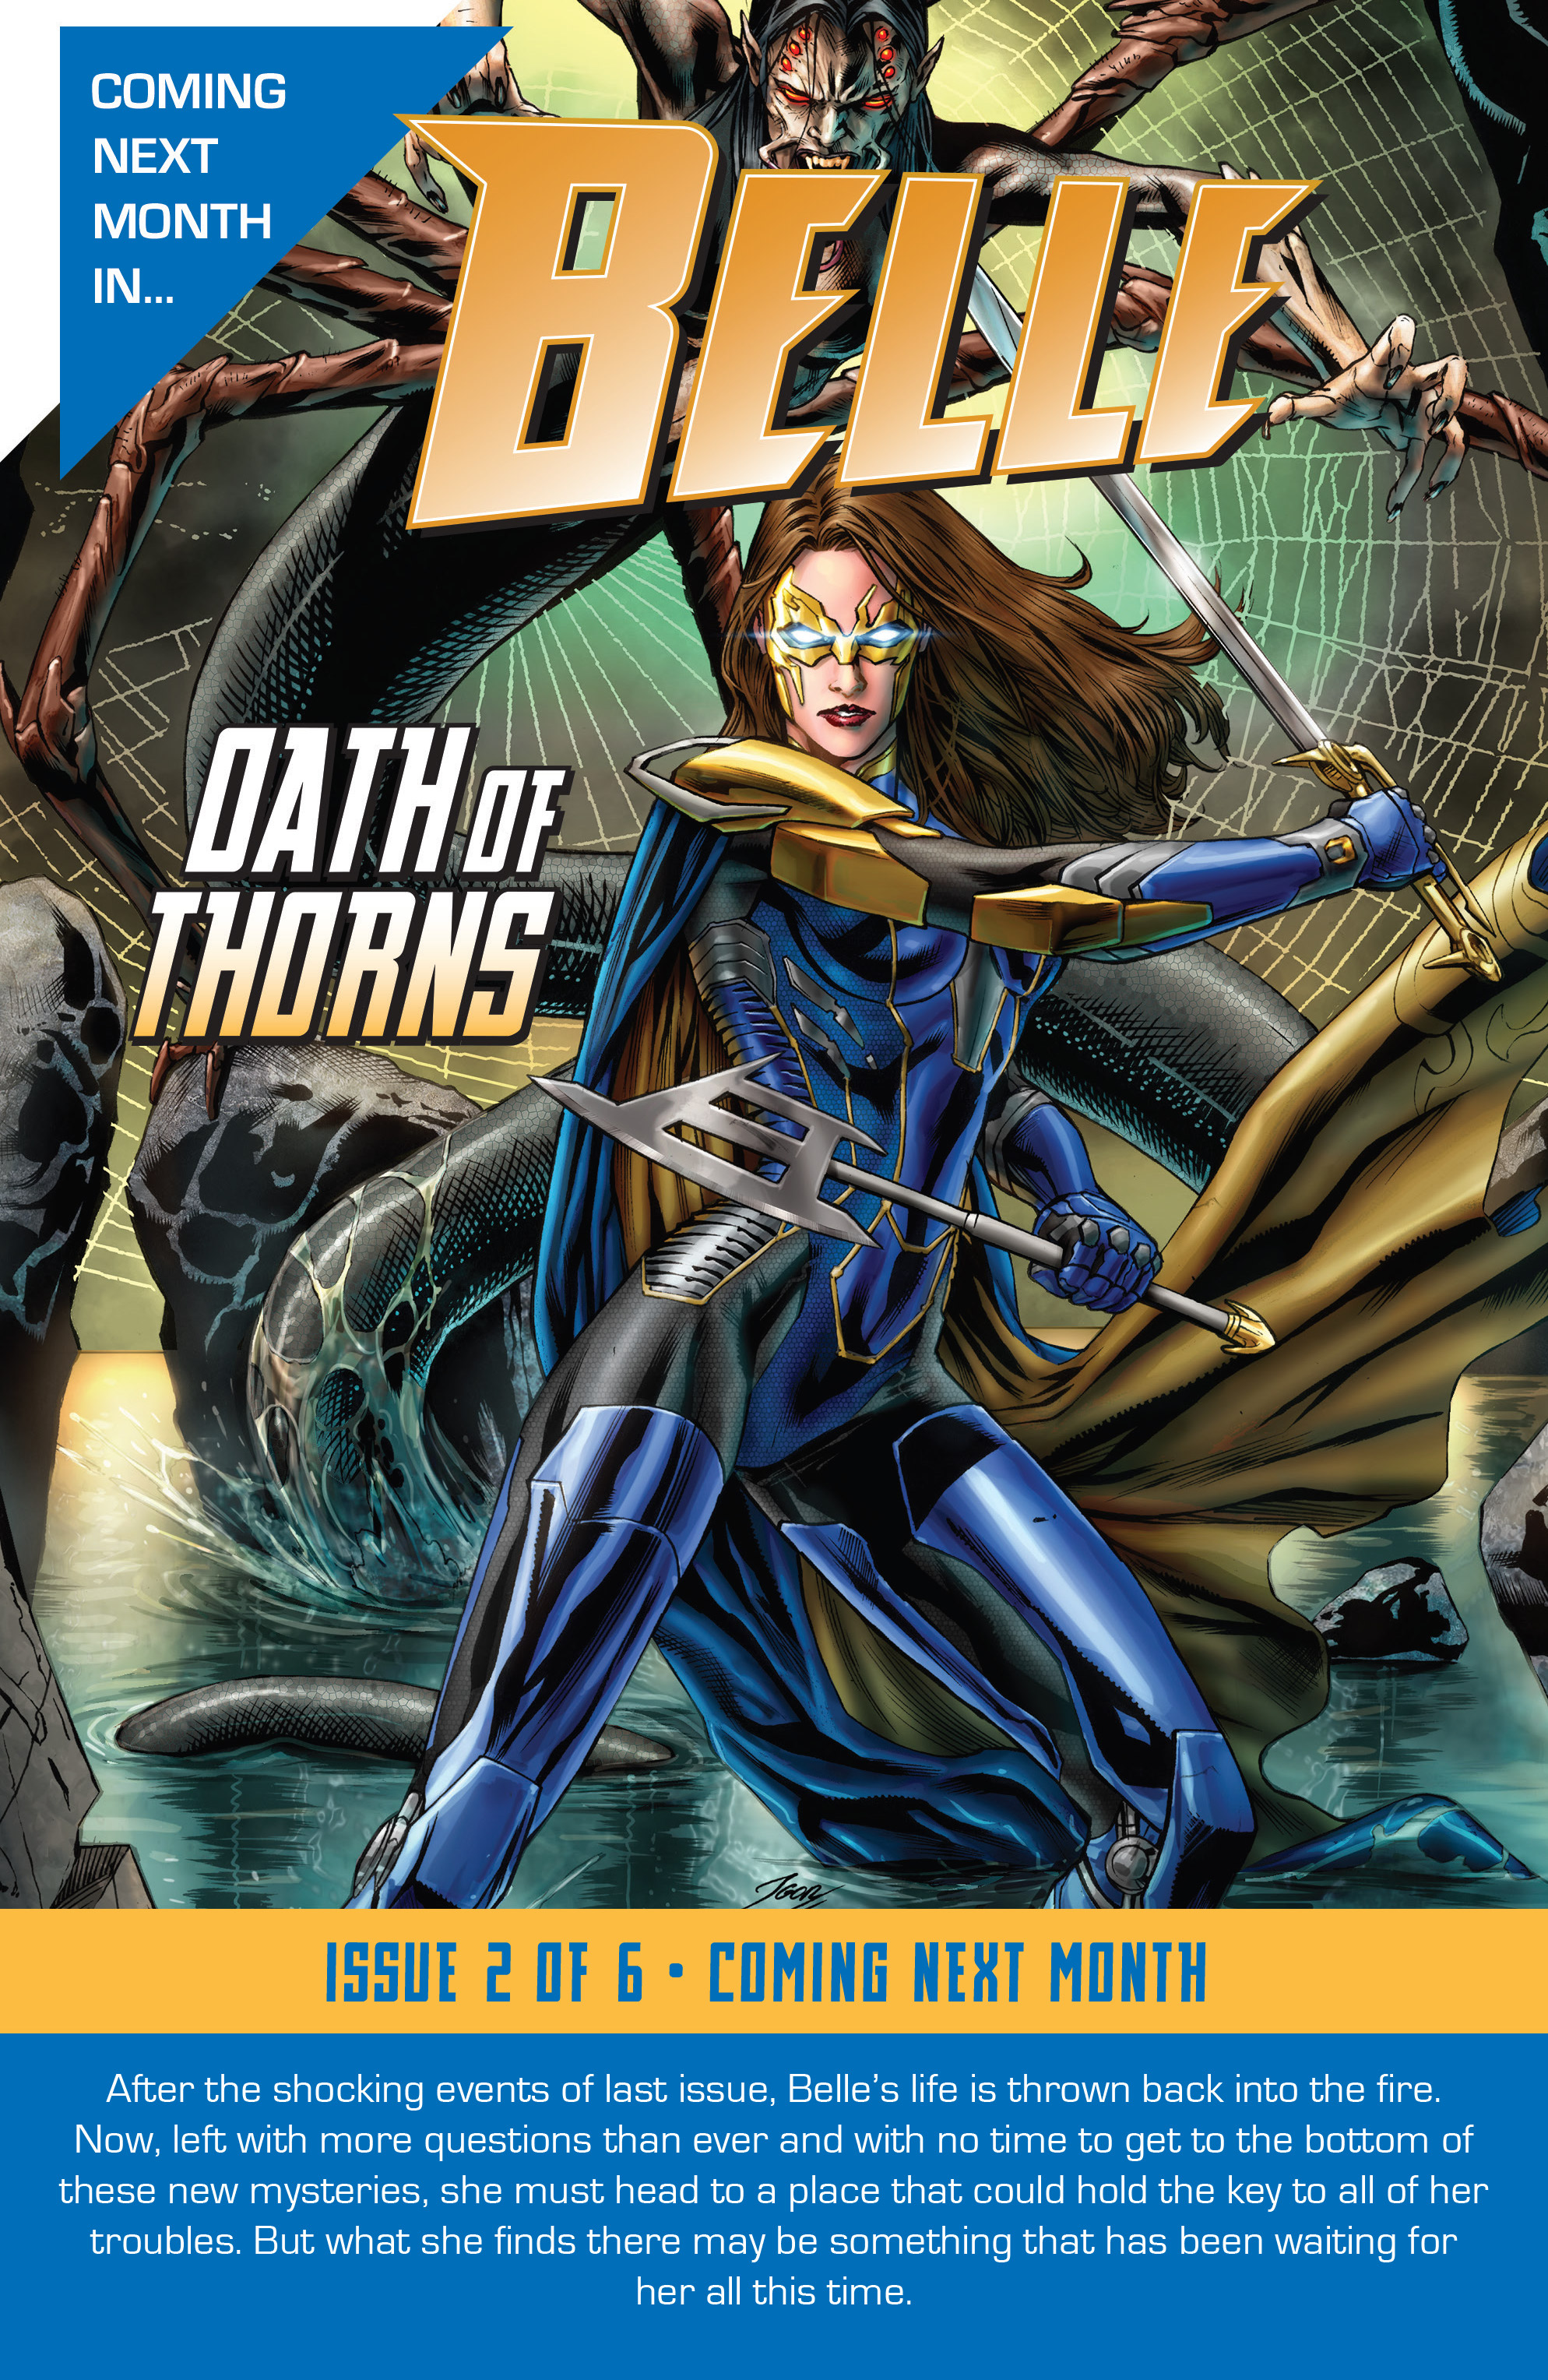 Belle Oath of Thorns 001 024